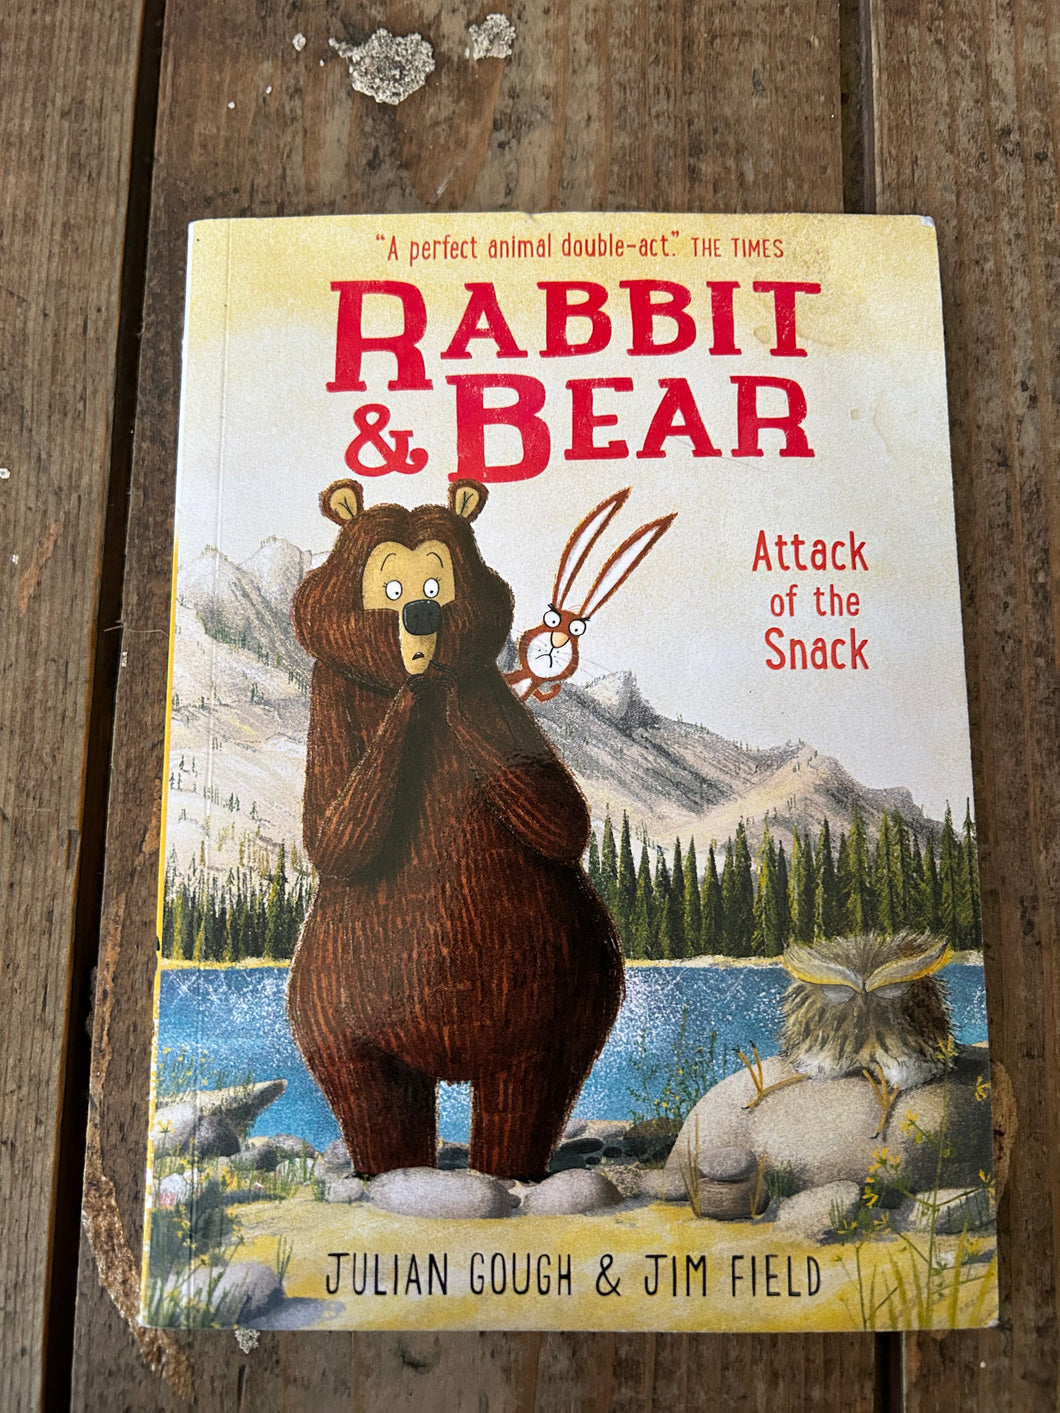 Rabbit &bear attack of the snack by Julian Gough